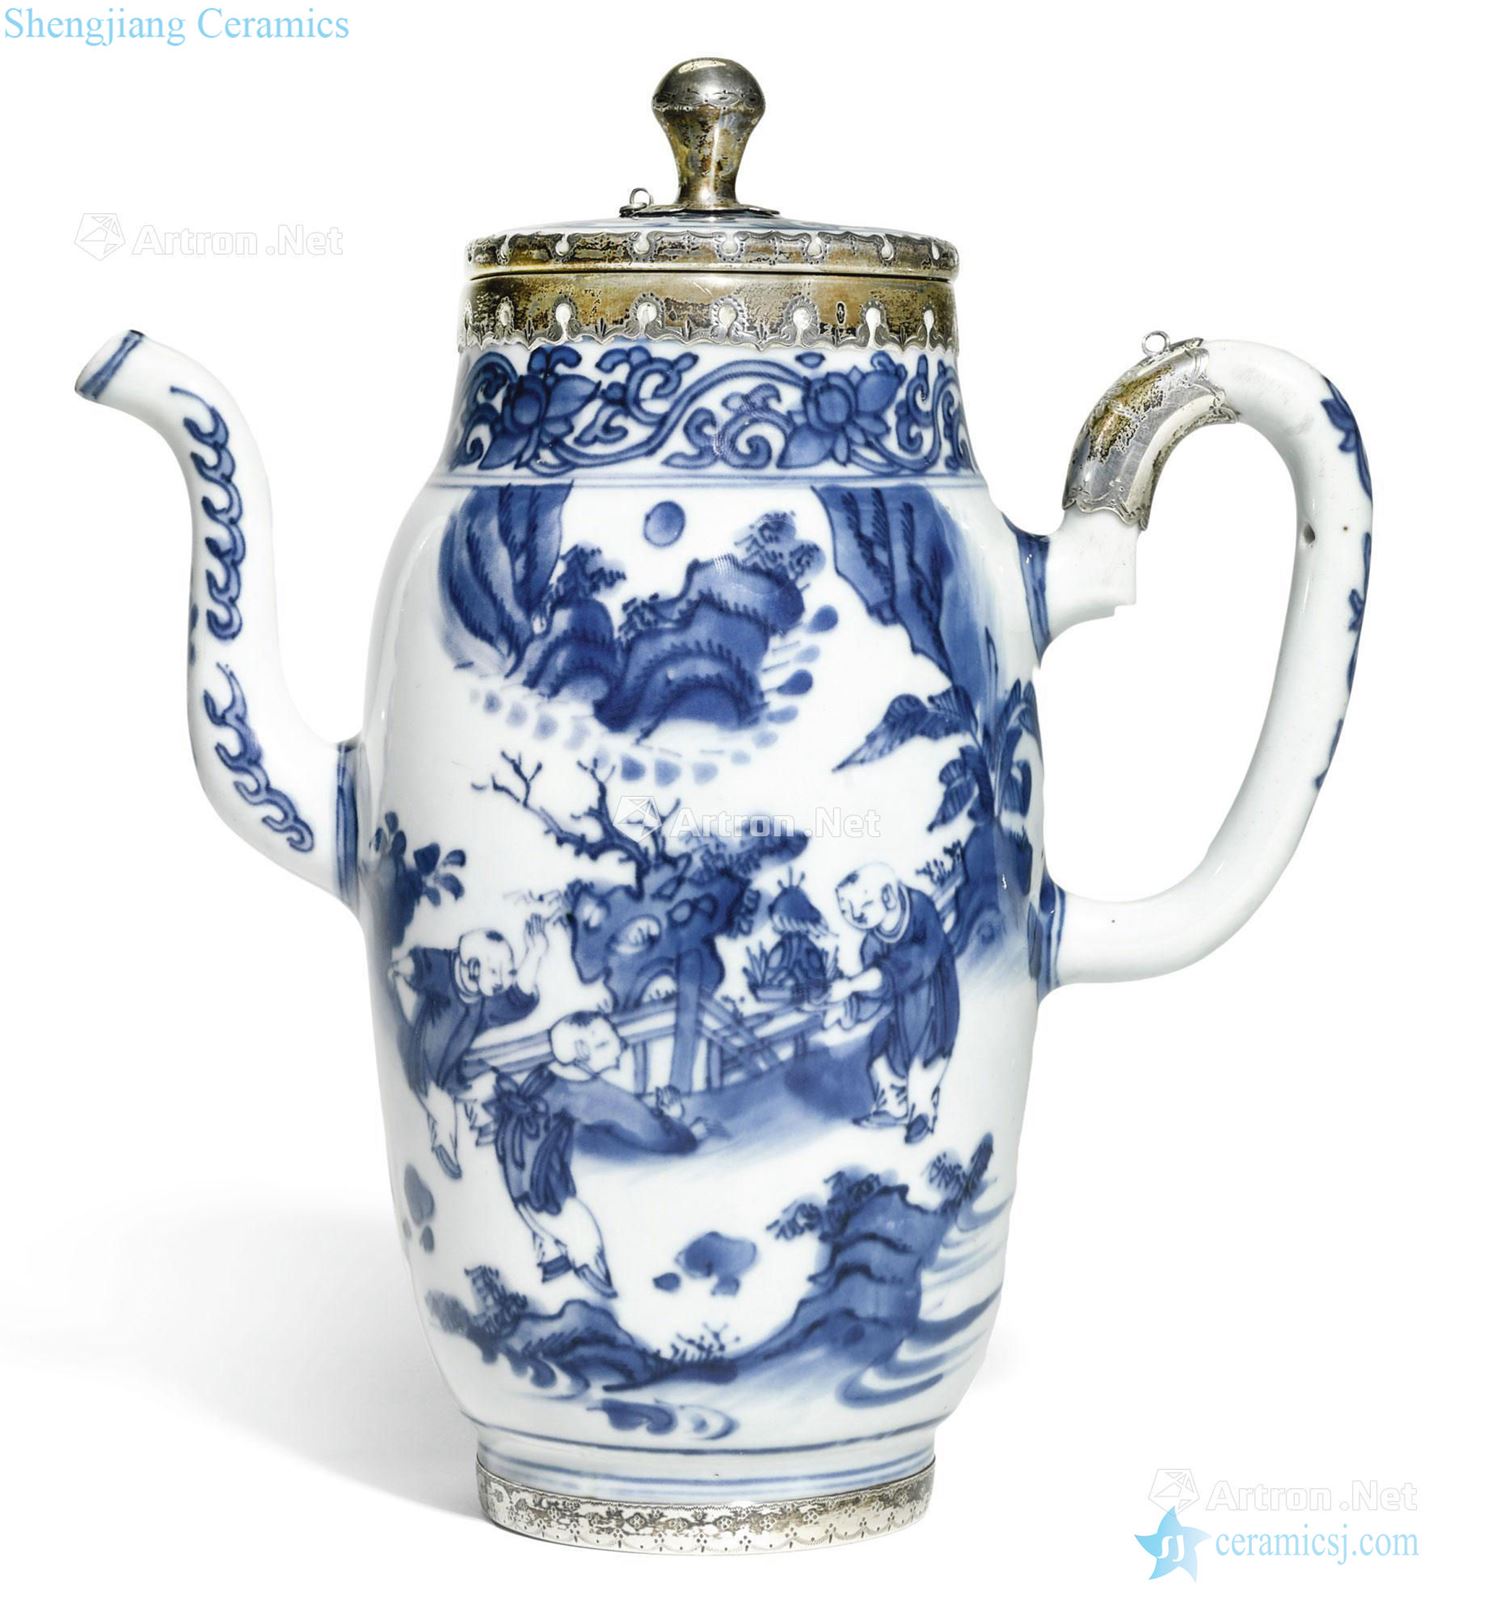 The late Ming dynasty Blue and white lad title lines with silver teapot